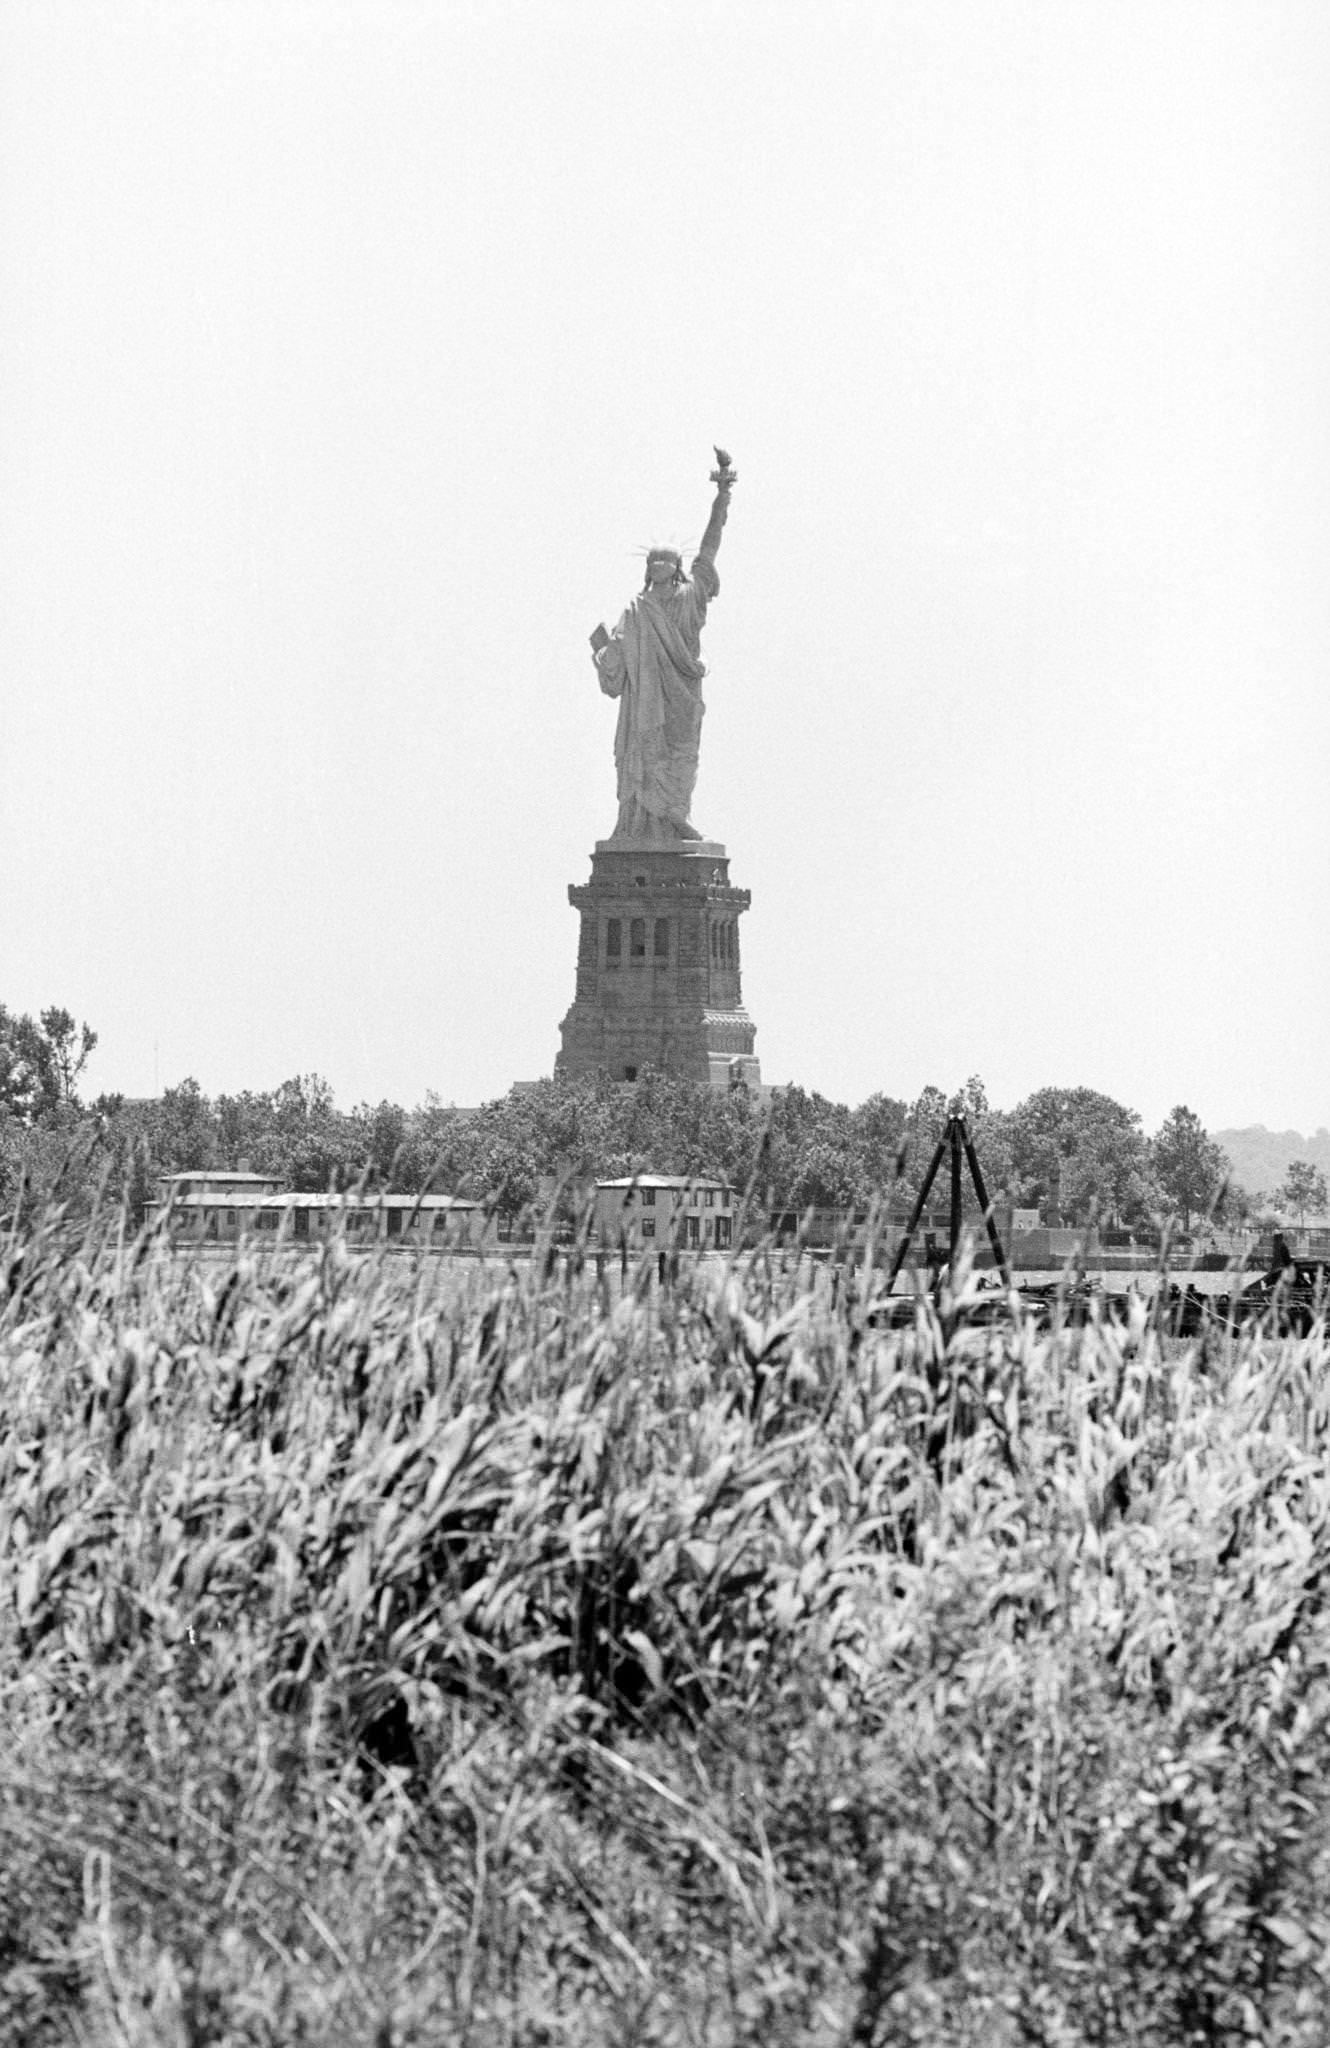 View of the Statue of Liberty from Jersey City, New Jersey, 1974.